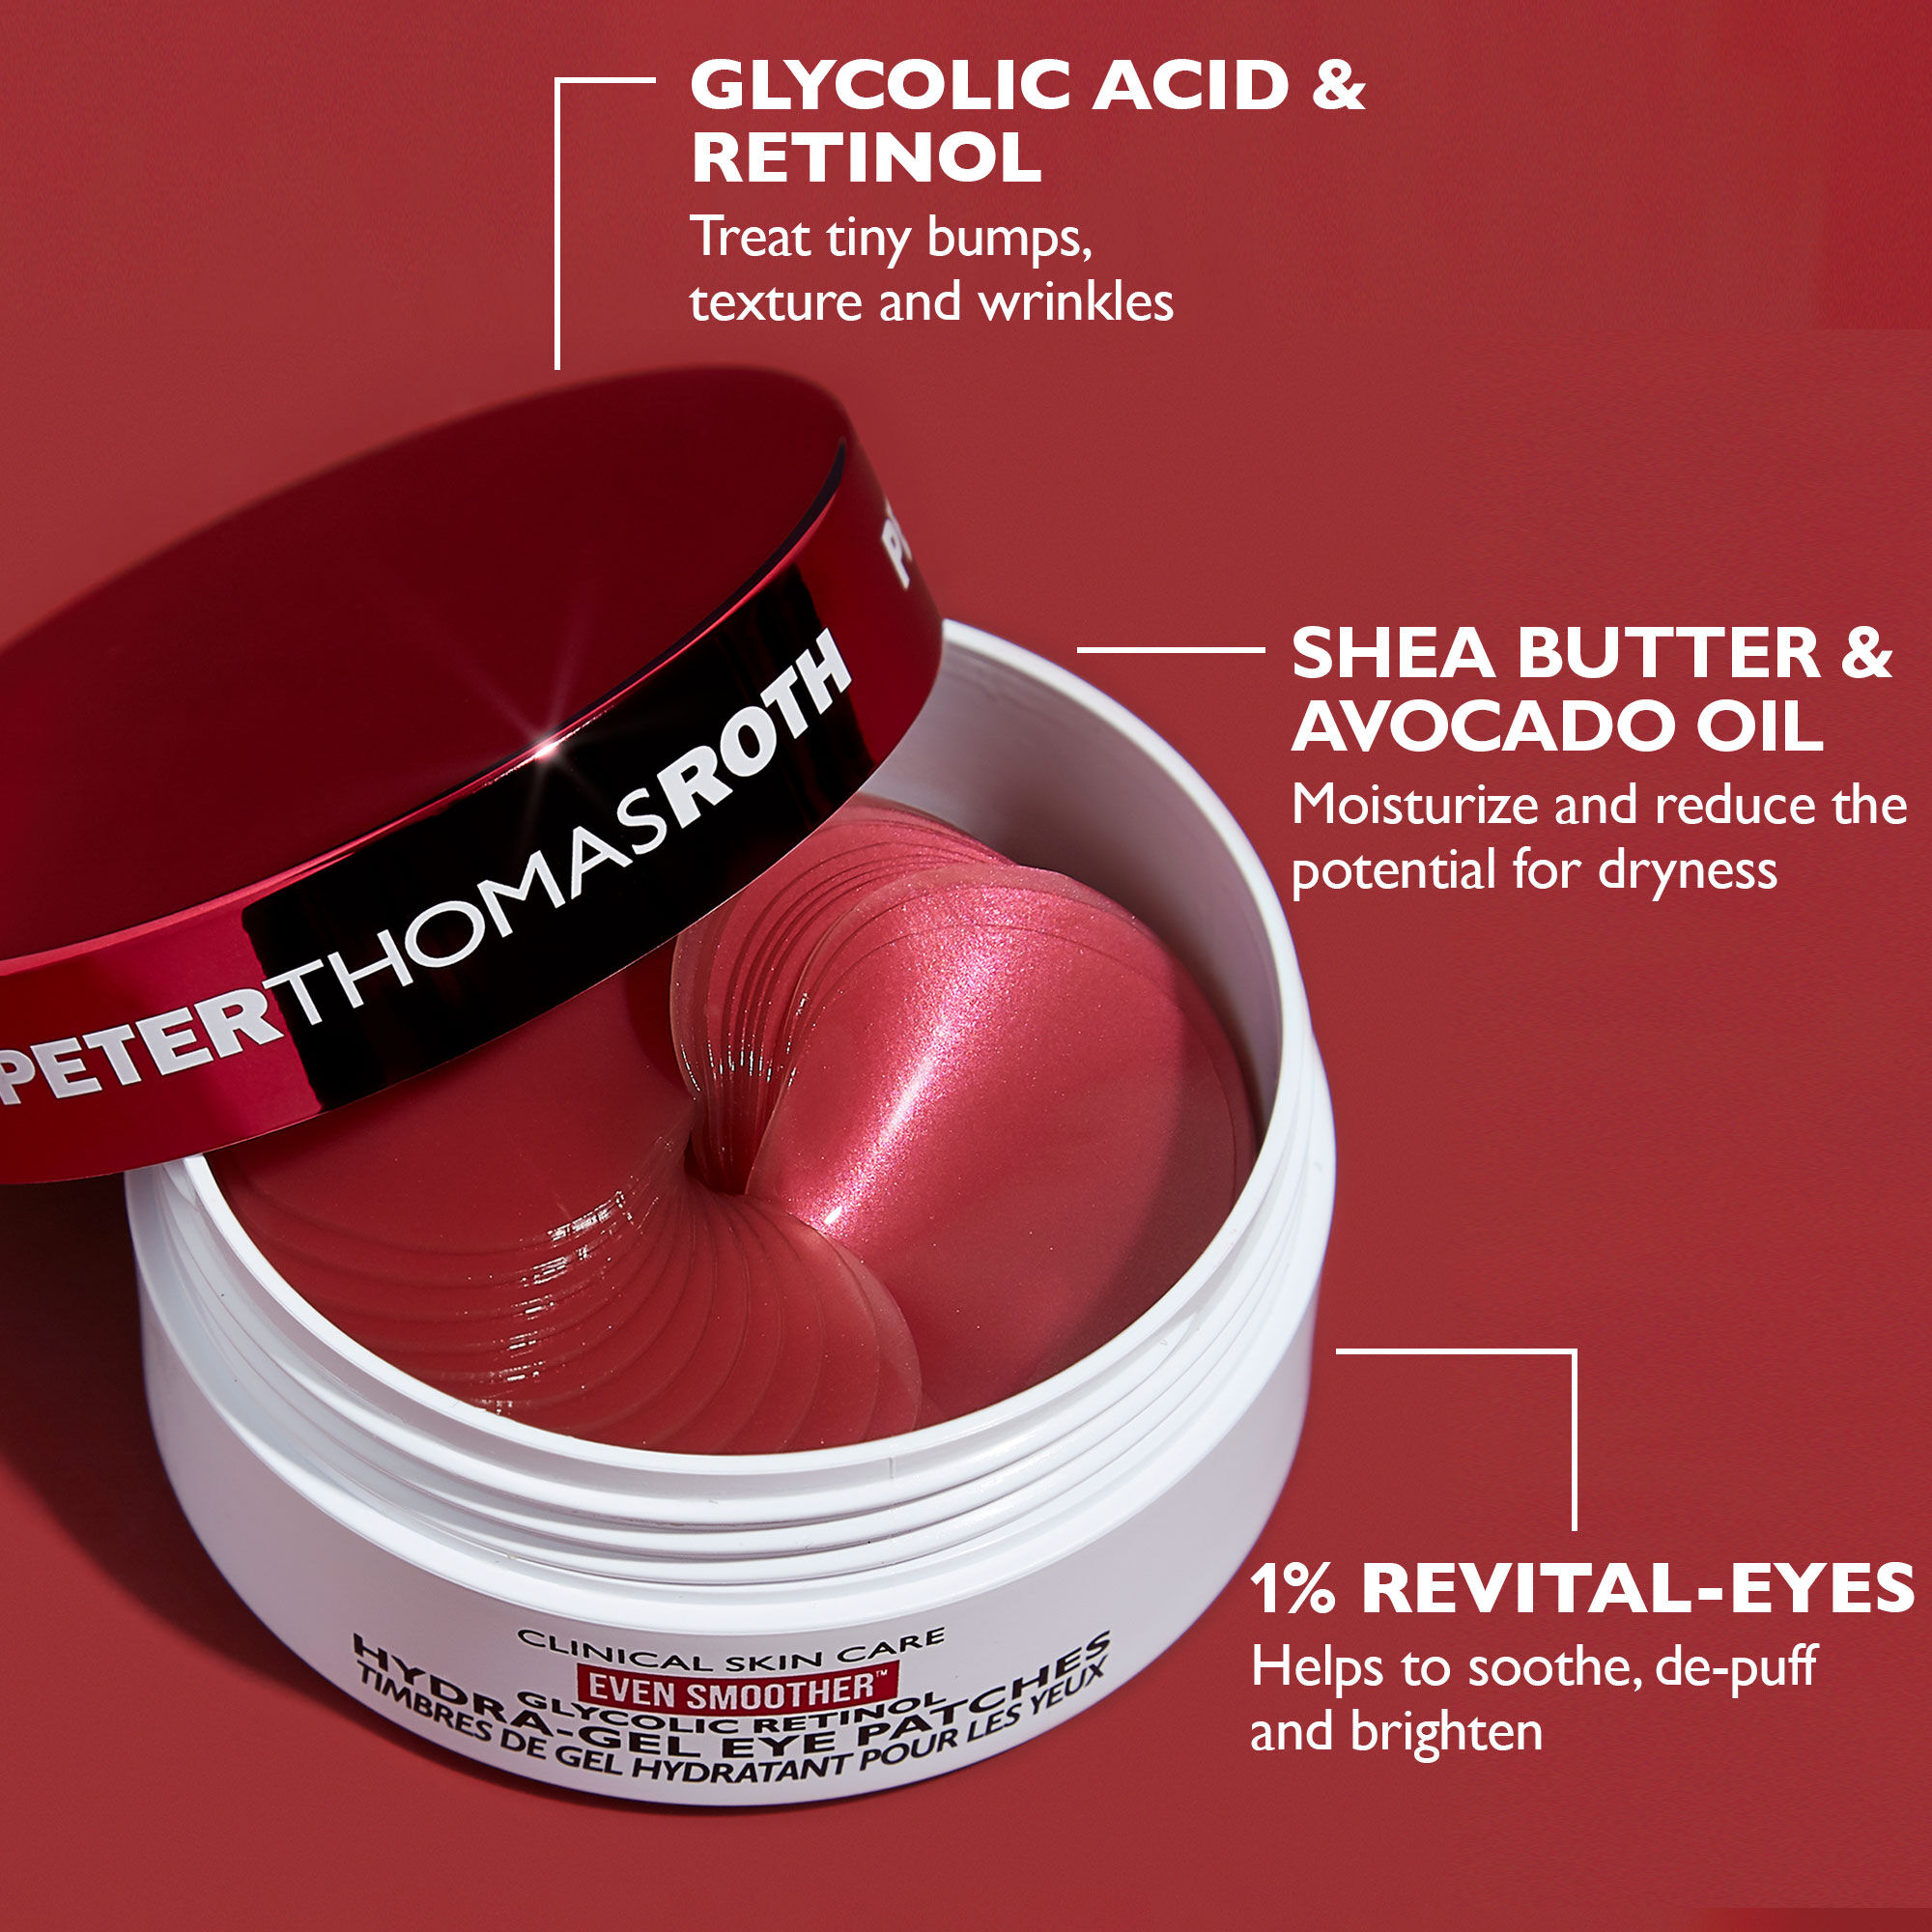 Even Smoother Glycolic Retinol Hydra-Gel Eye Patches | Peter